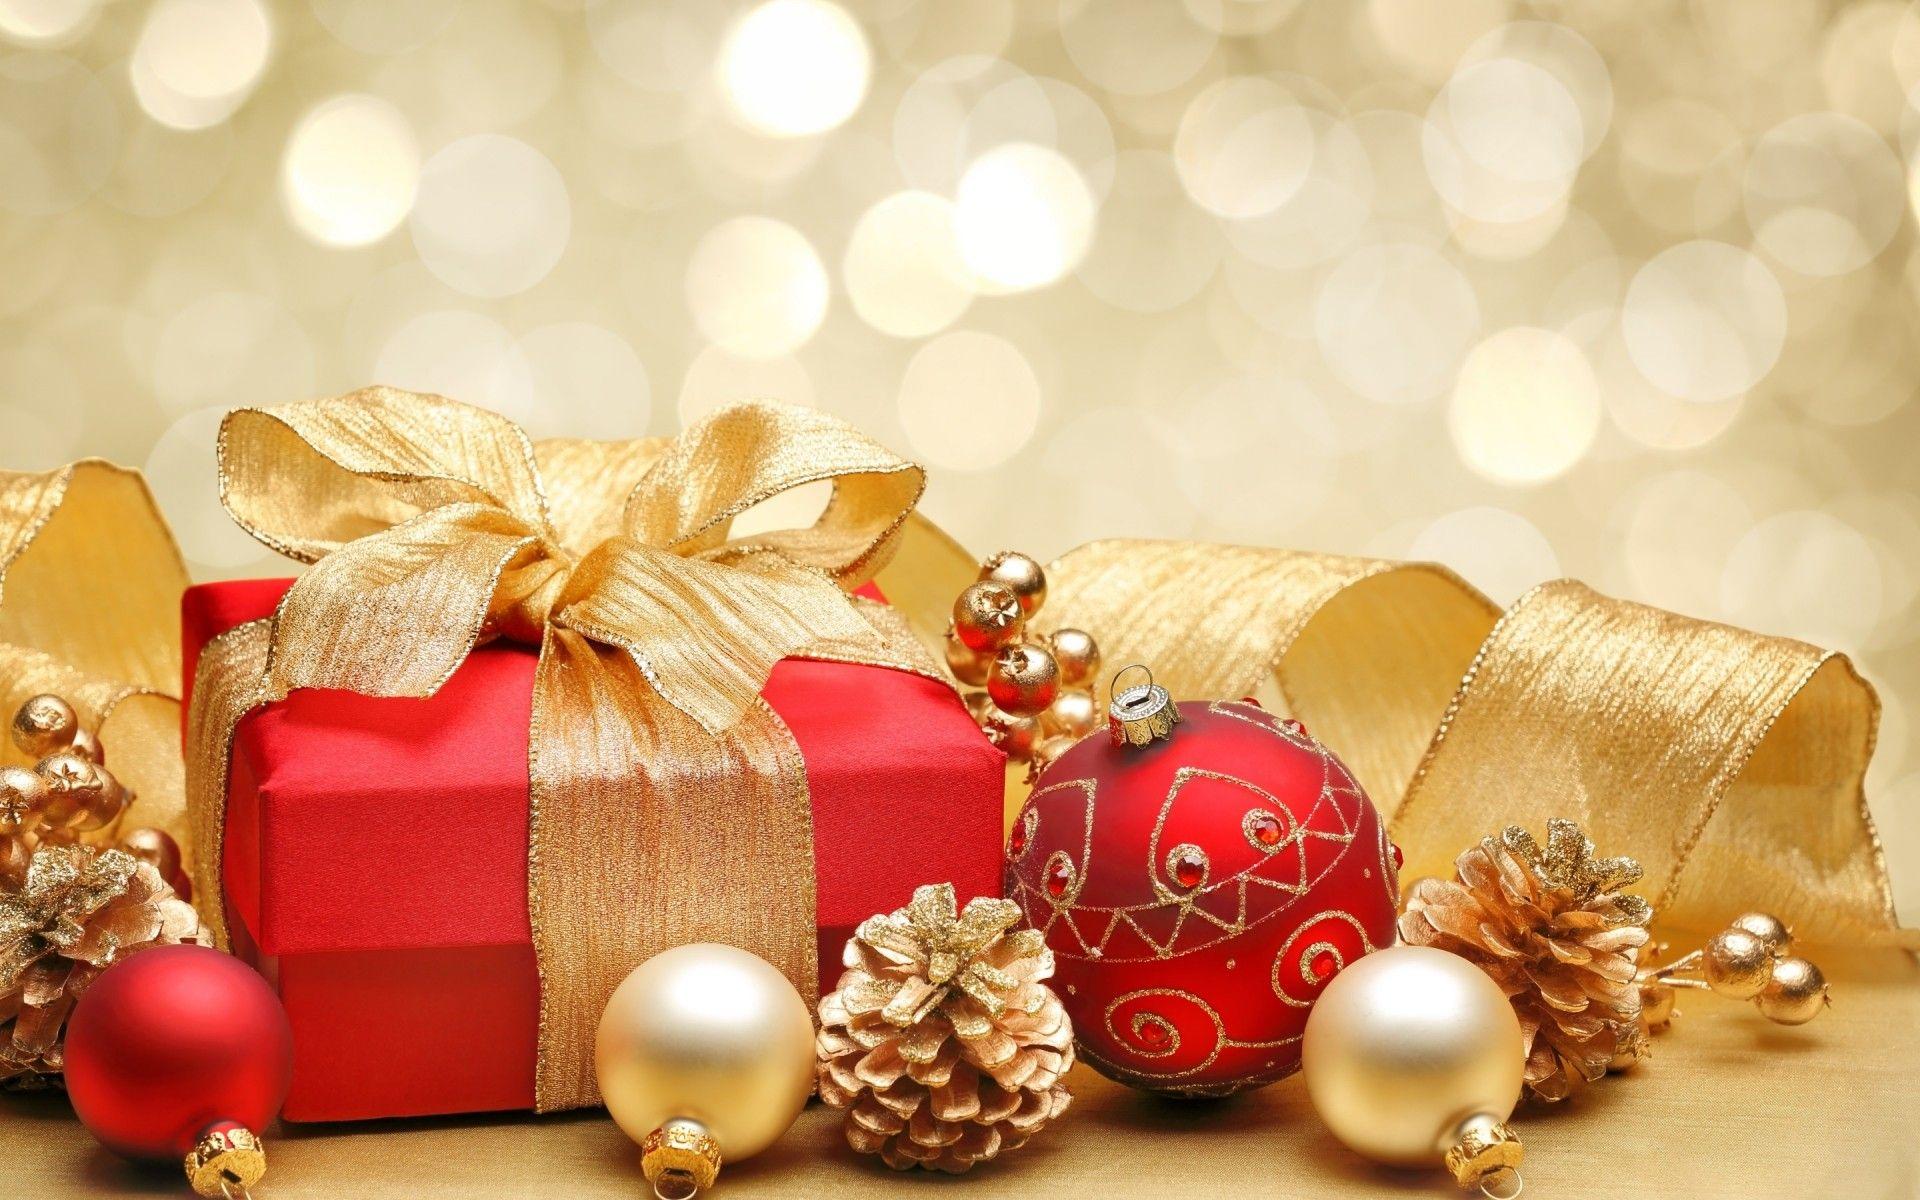 Christmas Gift Box and Decorations. Desktop wallpaper for free